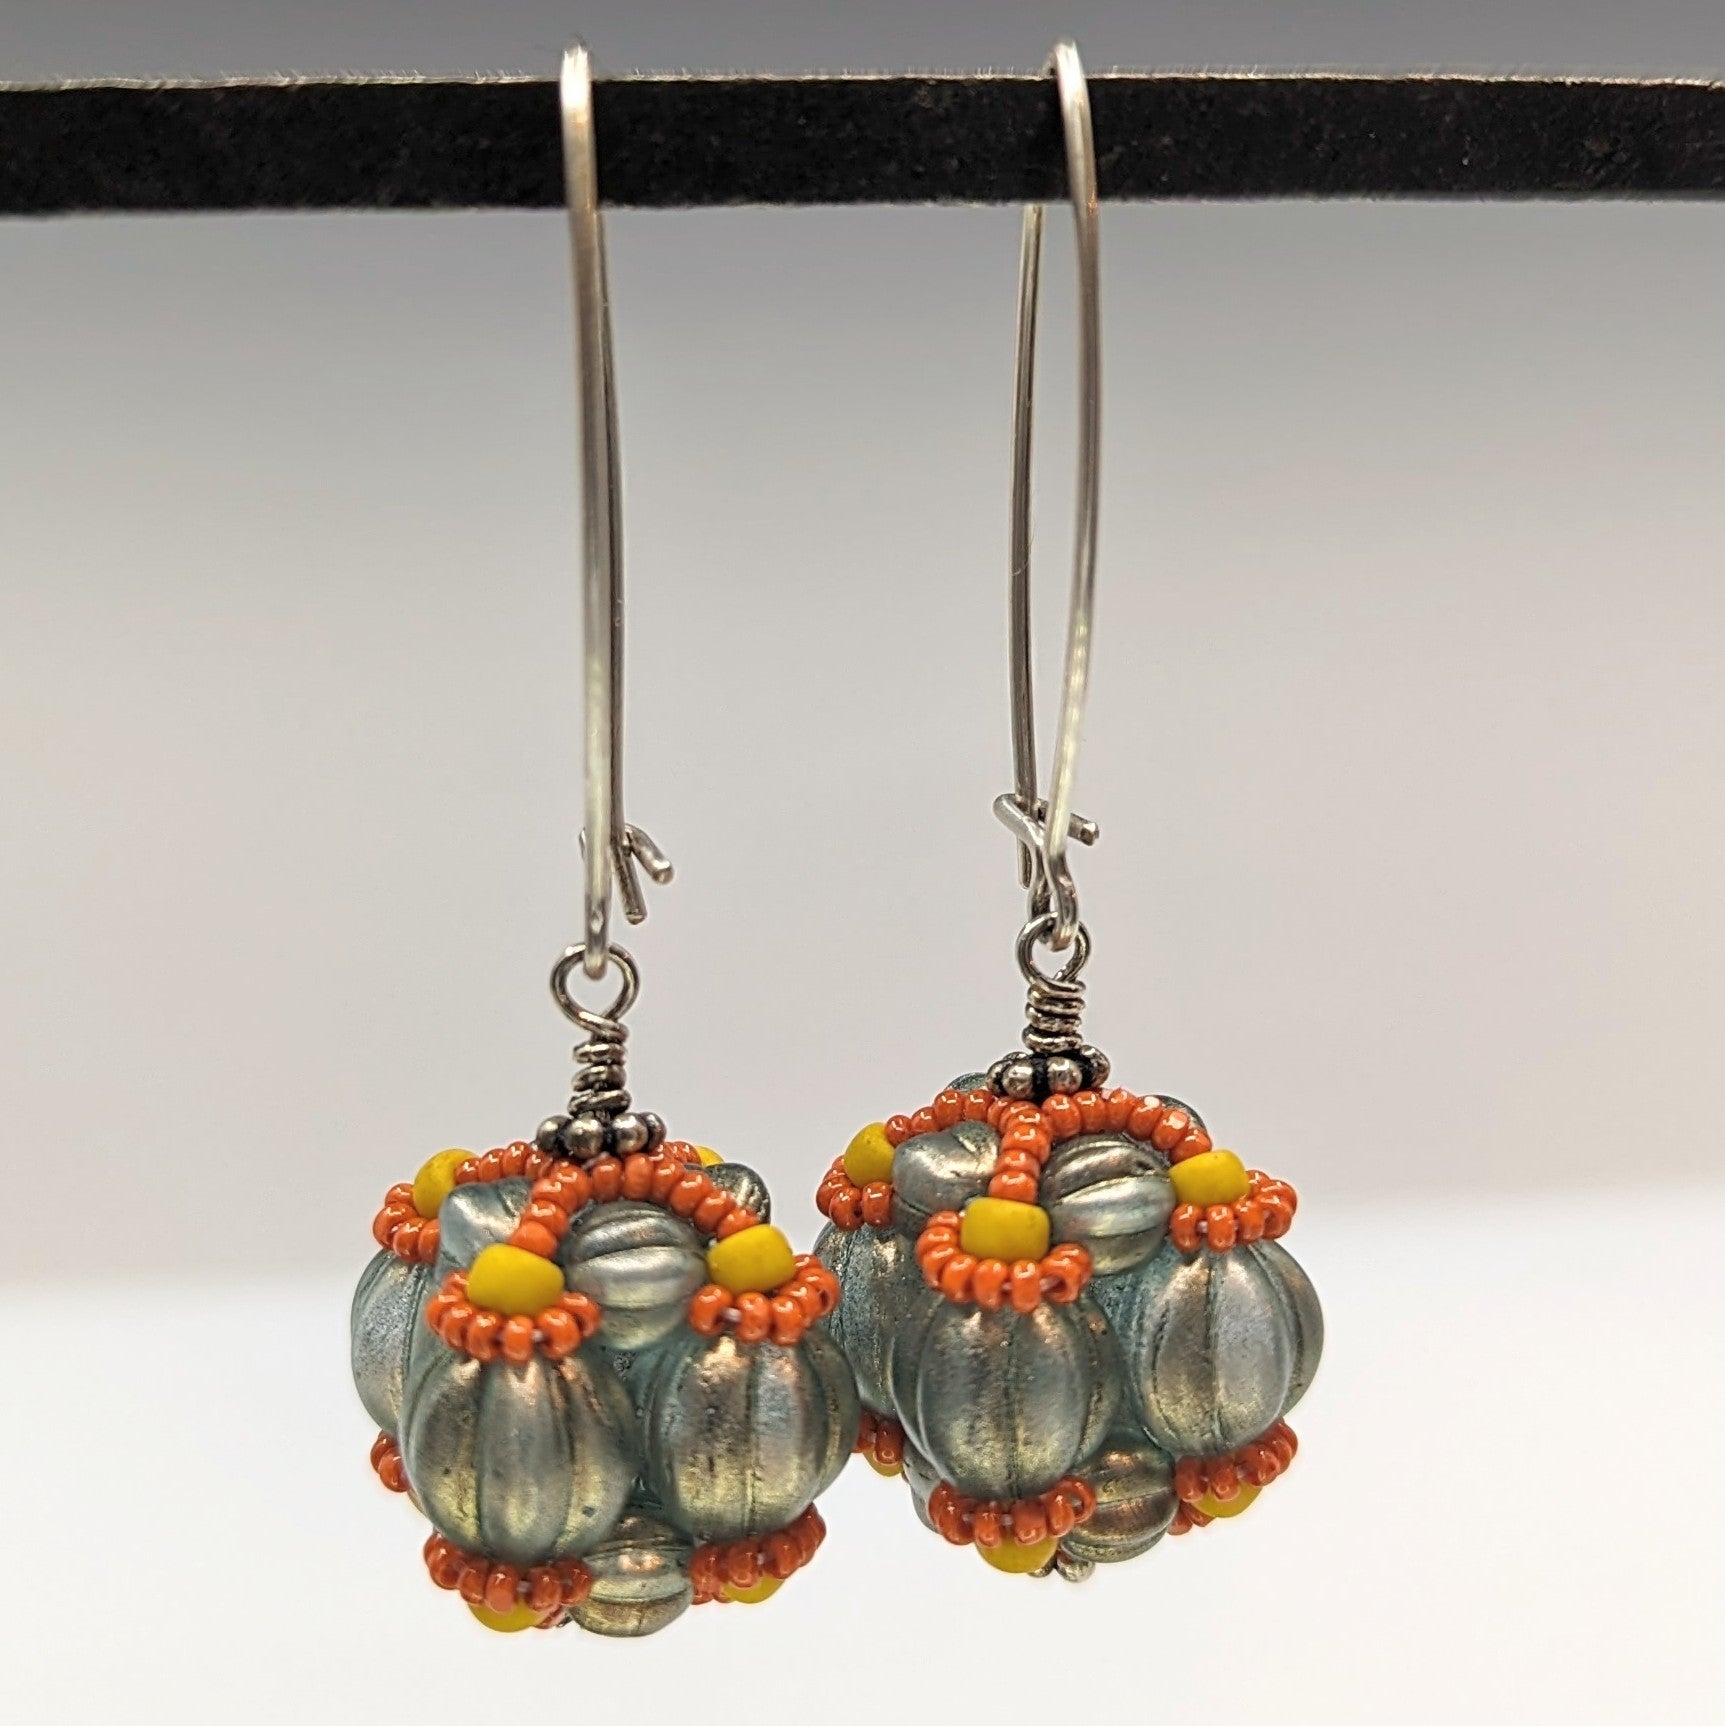 A pair of earrings hang from a black bar, against a gray background. The earrings have long silver oval wires that latch and there is a beaded ball dangling from the bottom that is made from ridged round beads that are a pale, translucent aqua color with gold finish. The top part of each beaded bead is outlined with lines of tiny yellow and orange-brown seed beads.